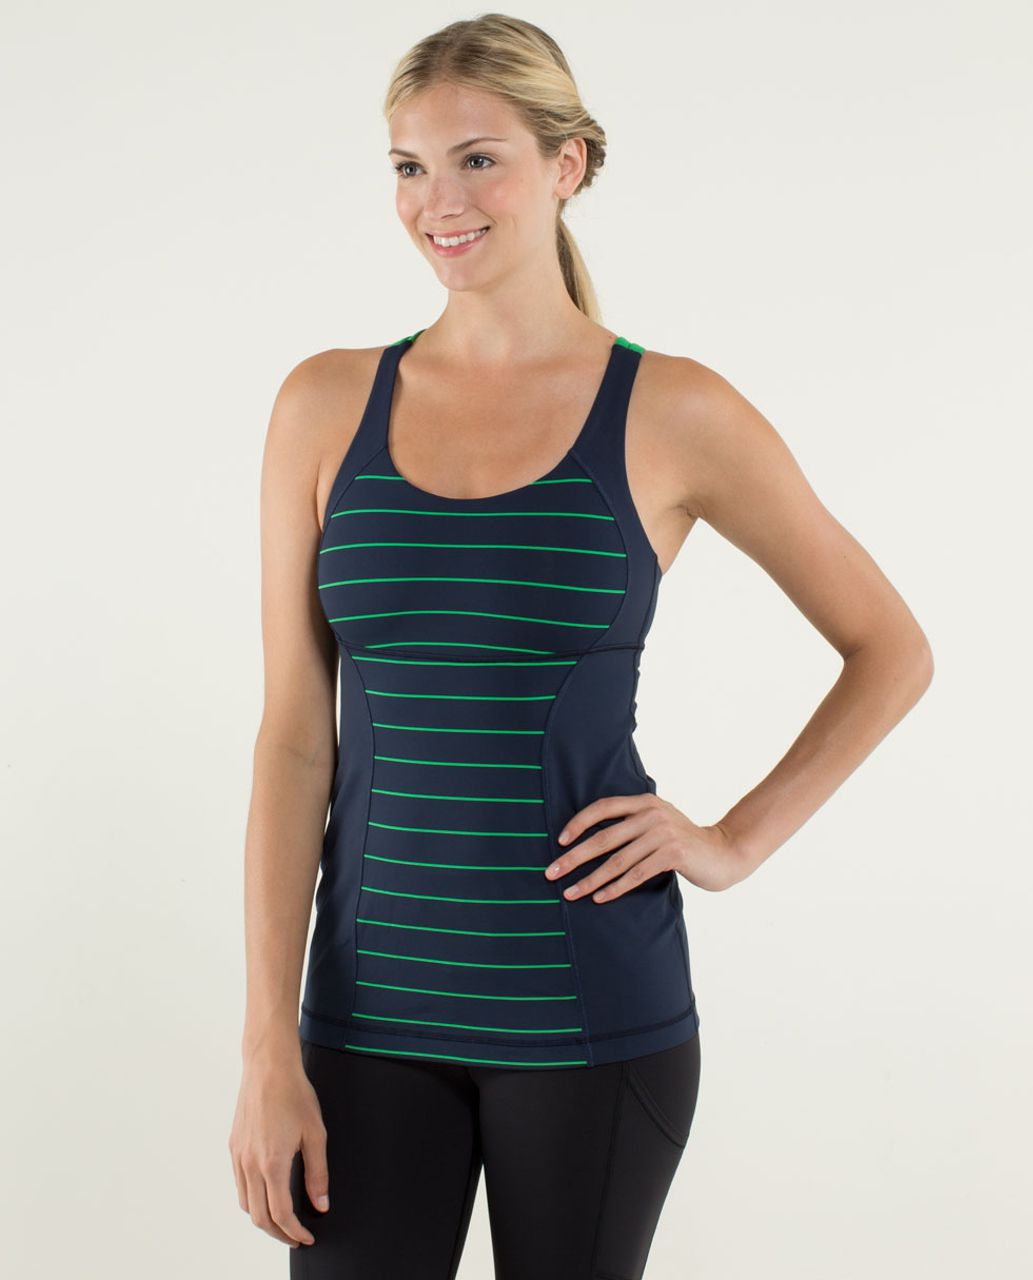 NWTS Lululemon Energy Bra Long Line Green Strappy Gym Workout Size